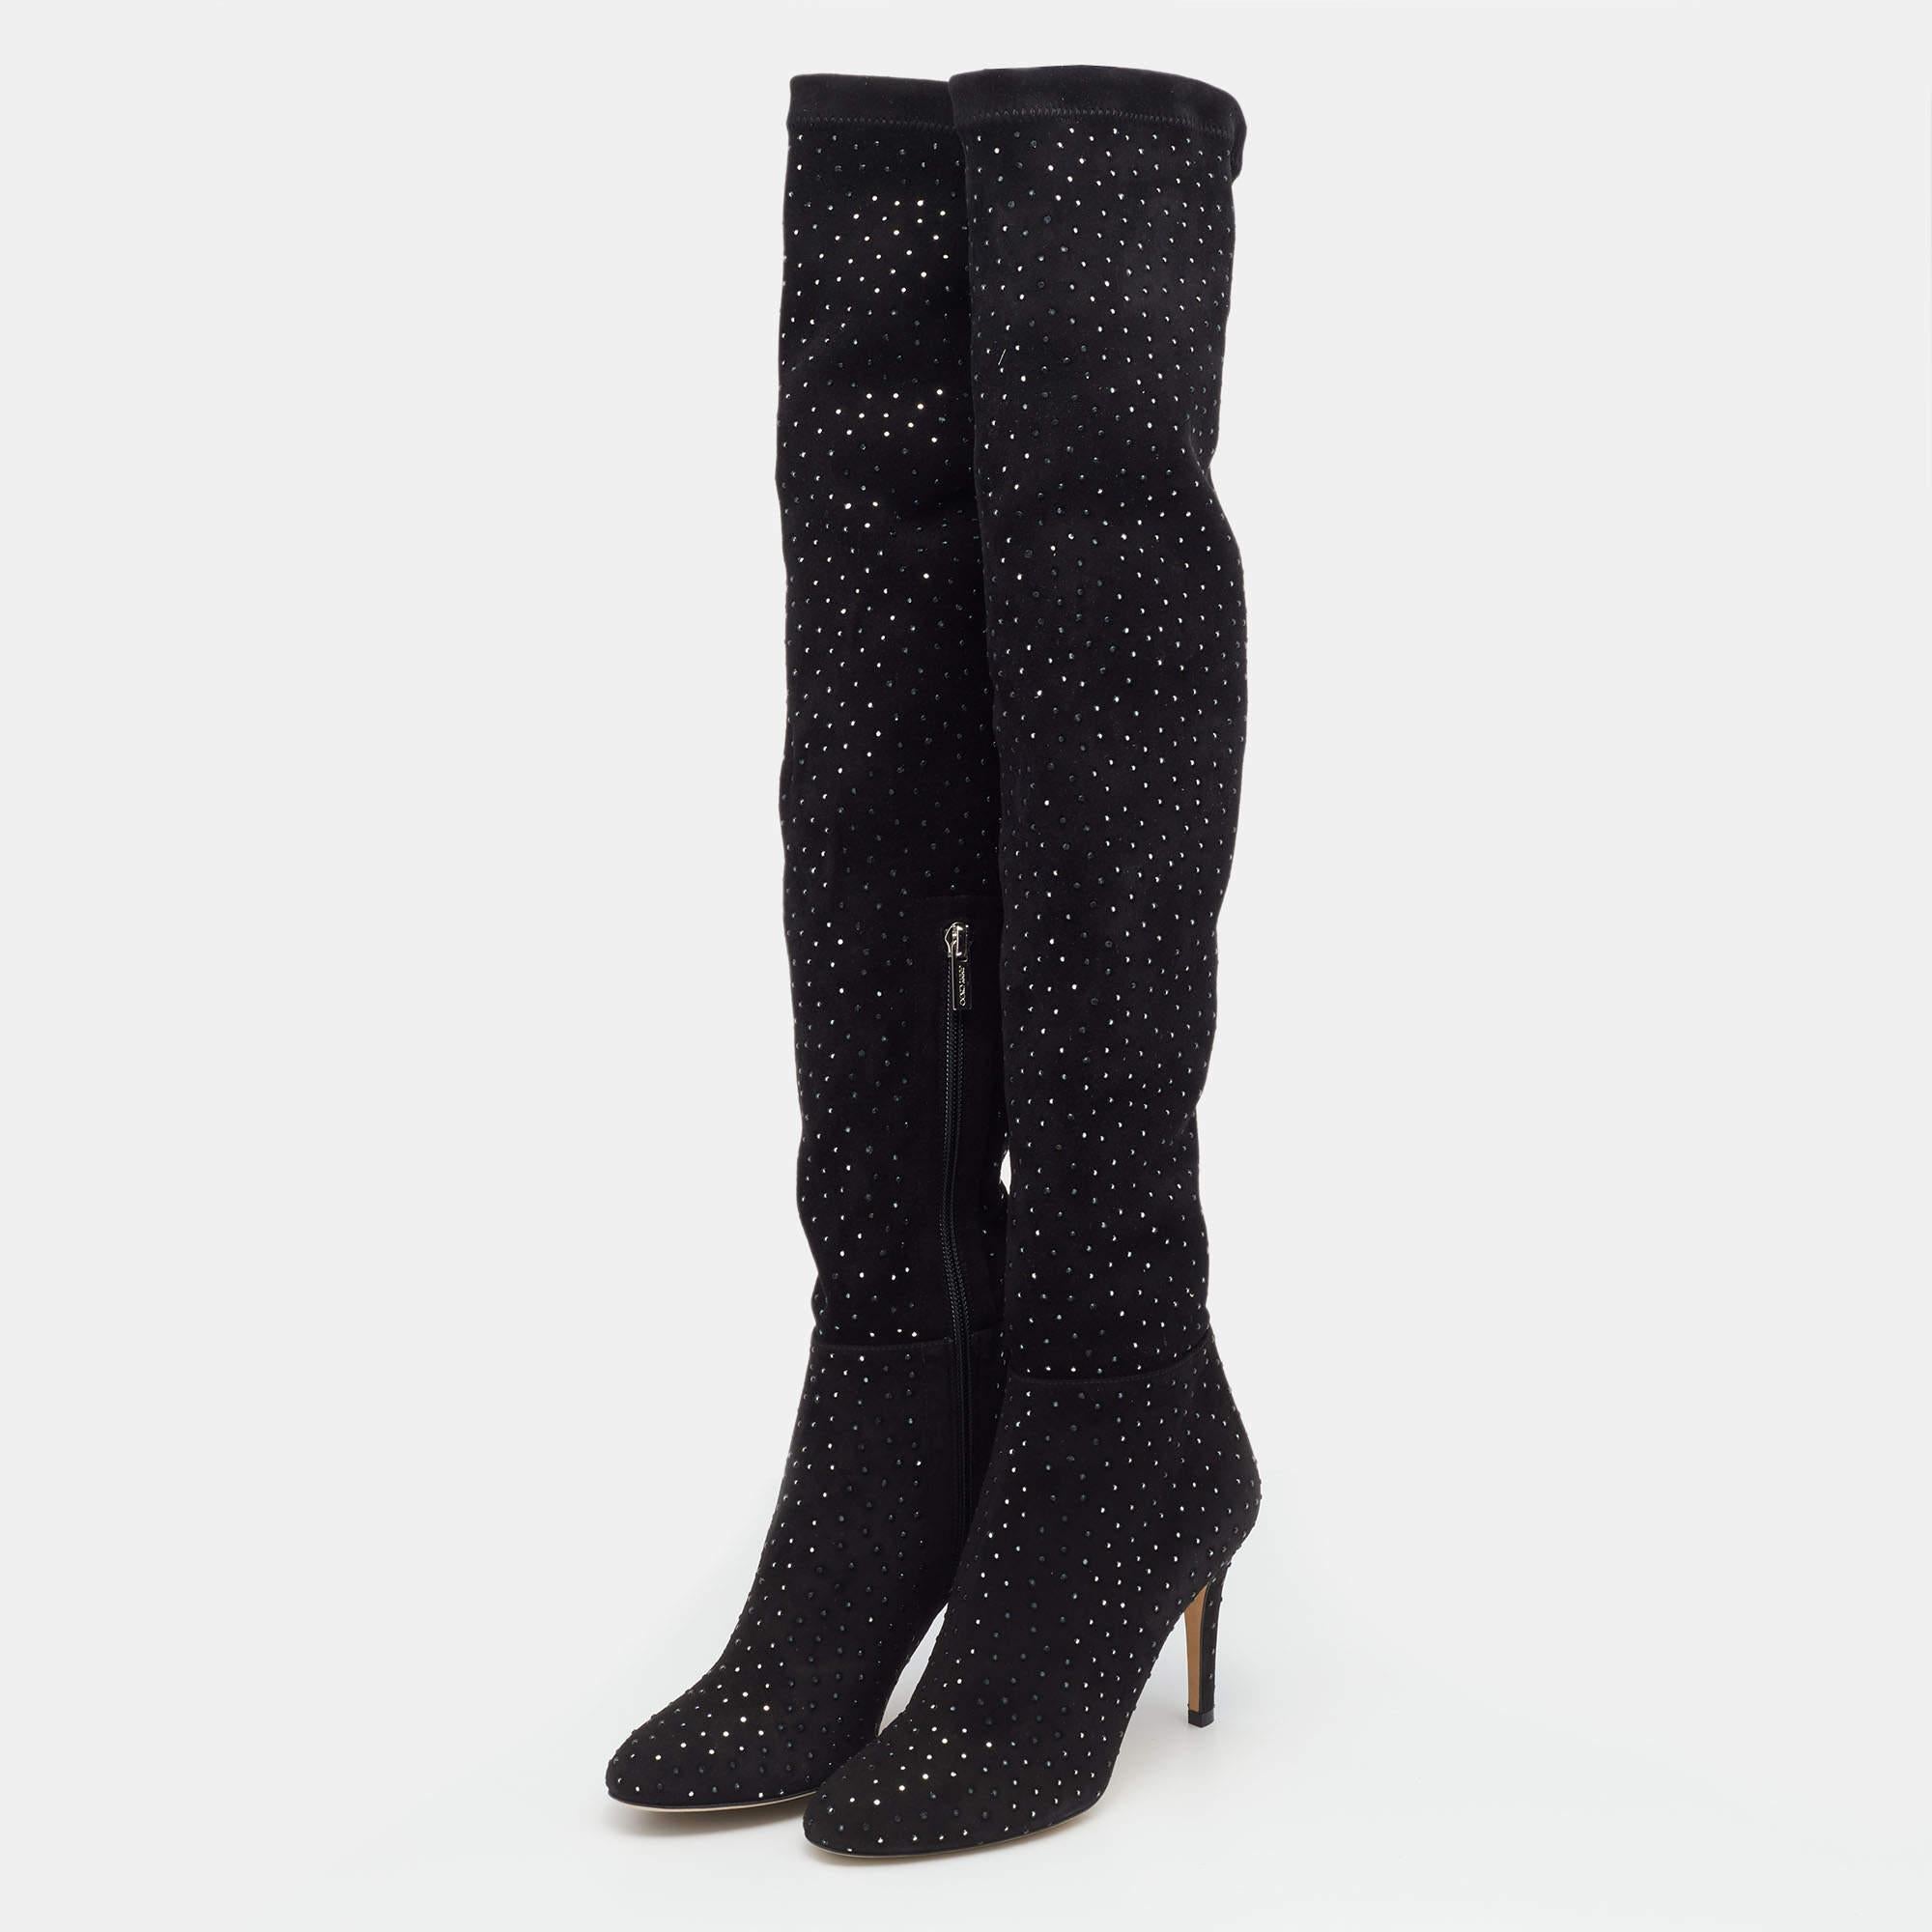 Jimmy Choo Black Stretch Fabric Crystal Embellished Thigh High Boots Size 36.5 In New Condition For Sale In Dubai, Al Qouz 2